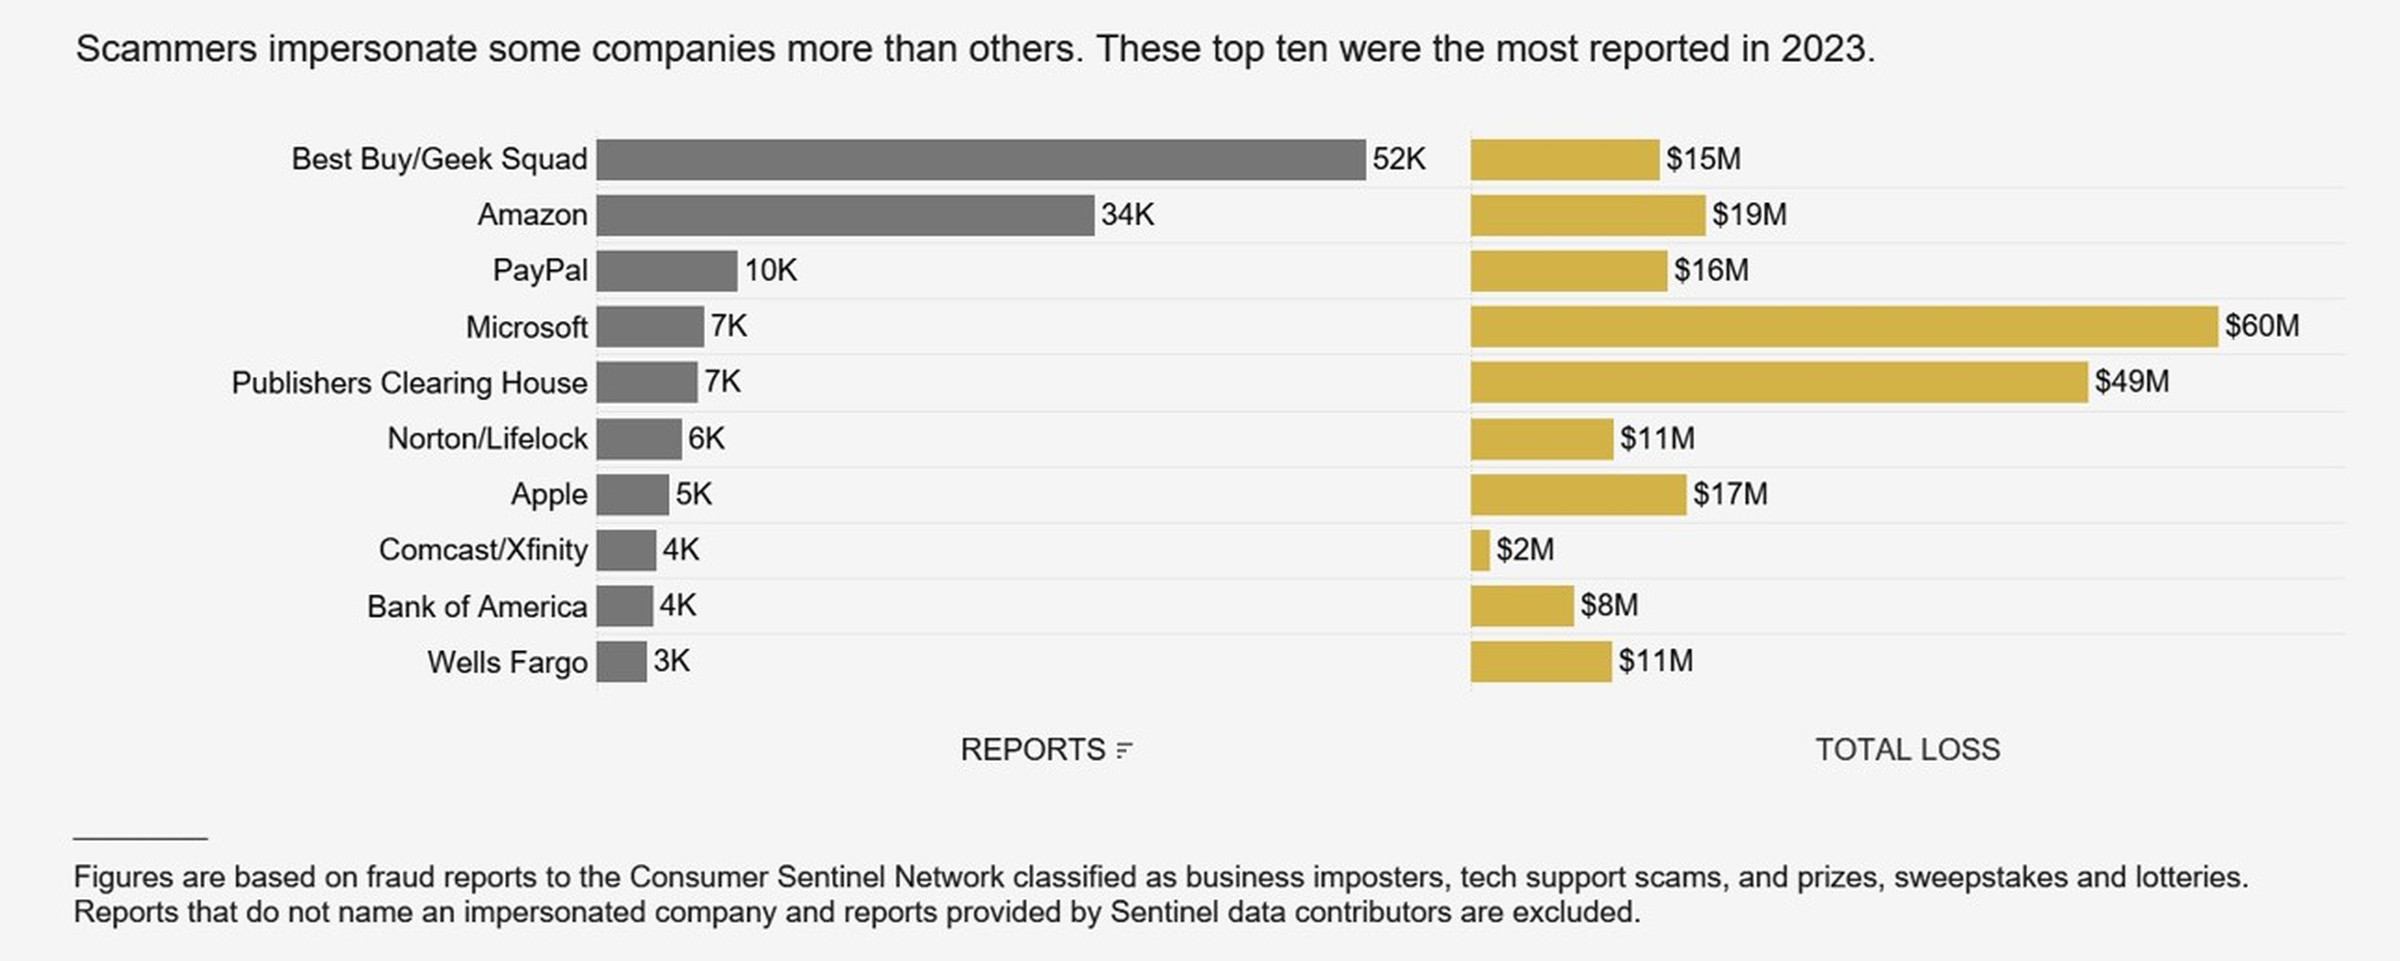 FTC chart on most frequently impersonated companies by scammers